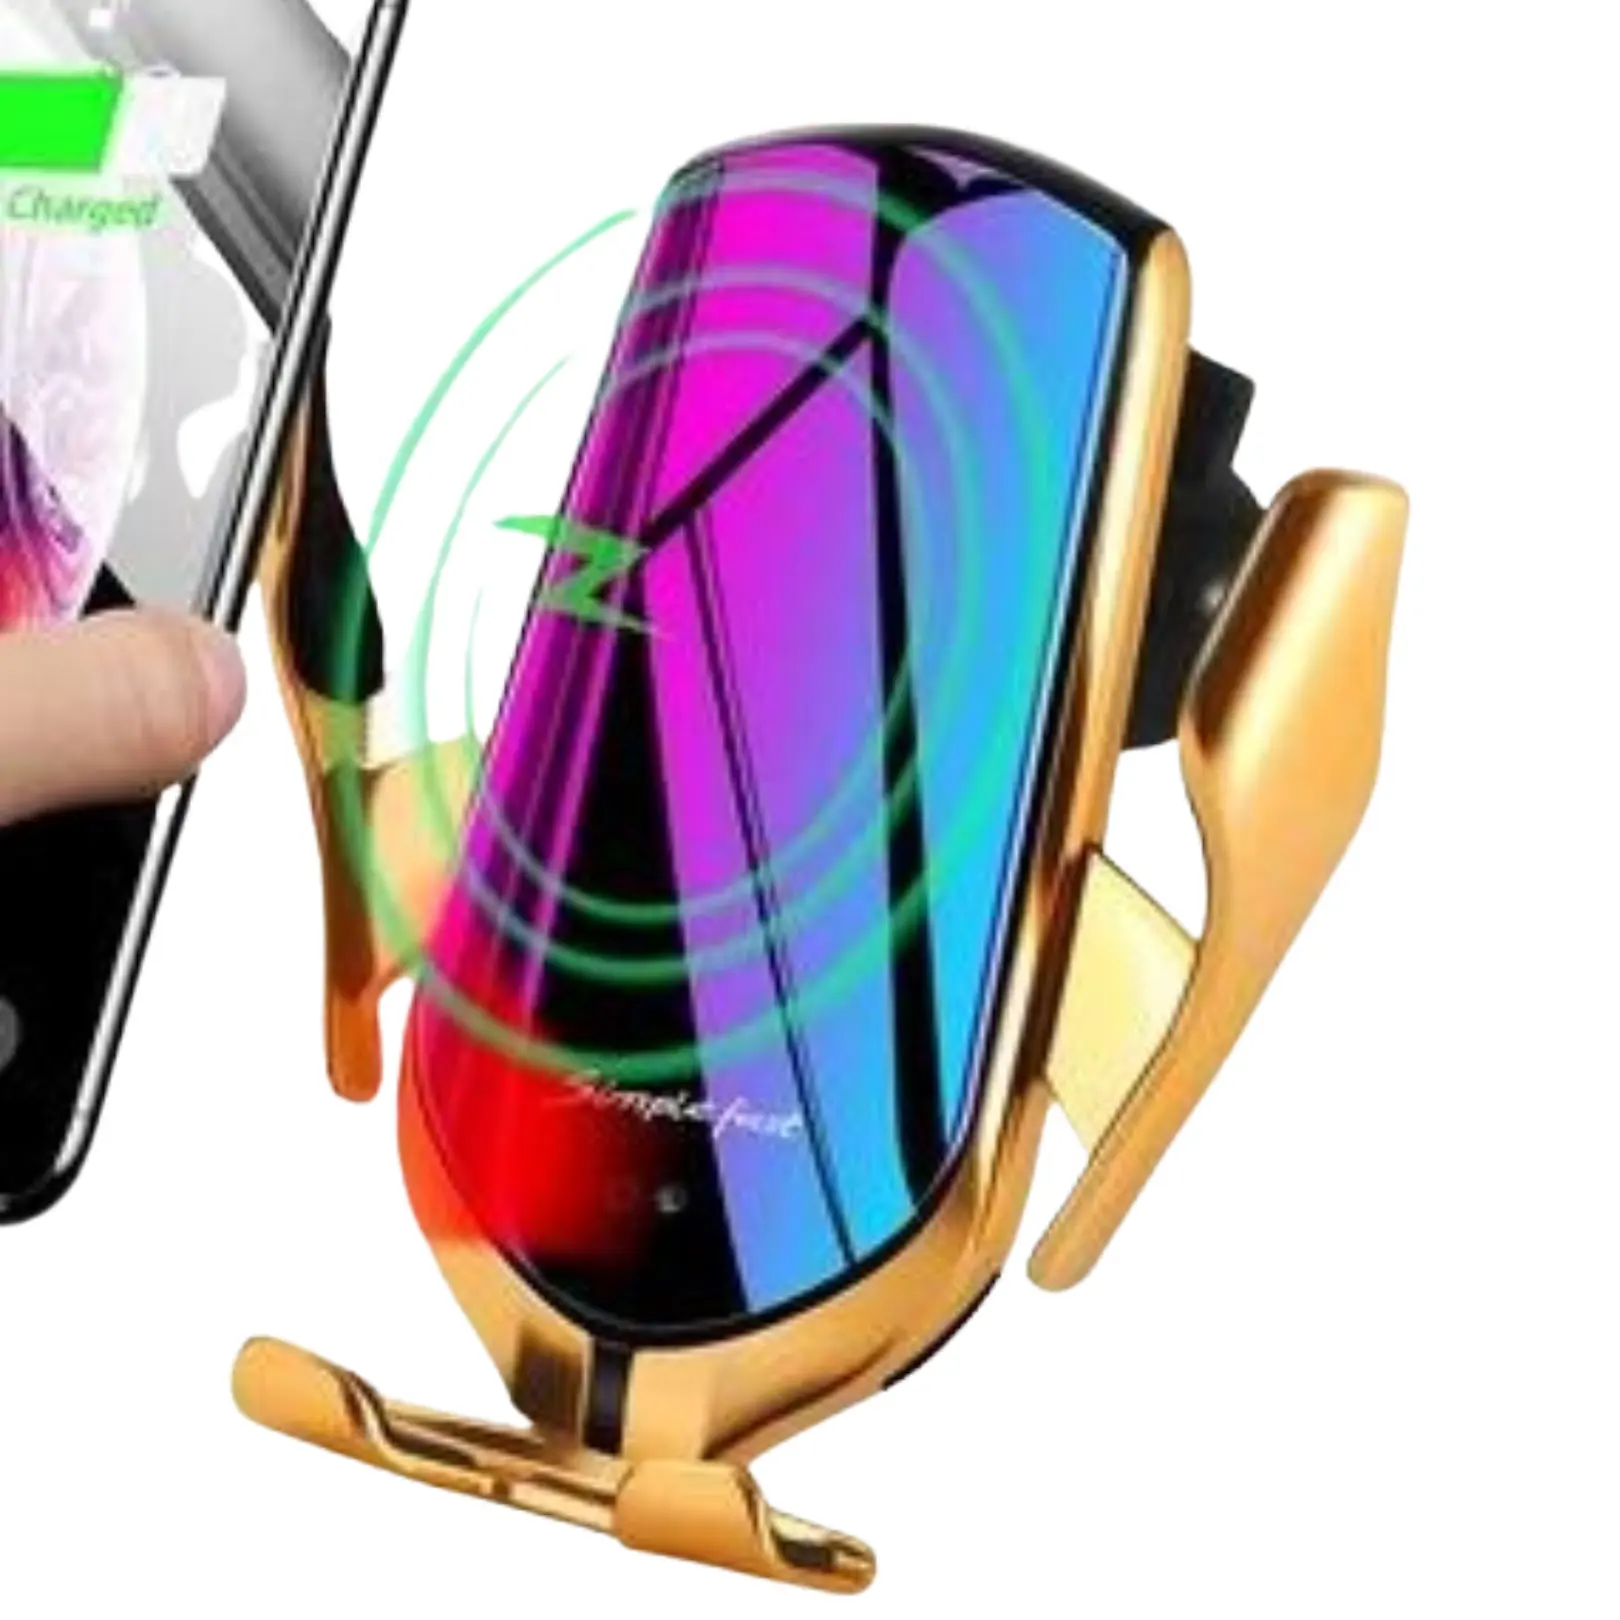 EUROPEAN COMPANY STOCK - Wireless Car Phone Charger and Holder - Gold for Iphone For Samsung Galaxy Note For Huawei CE ROHS